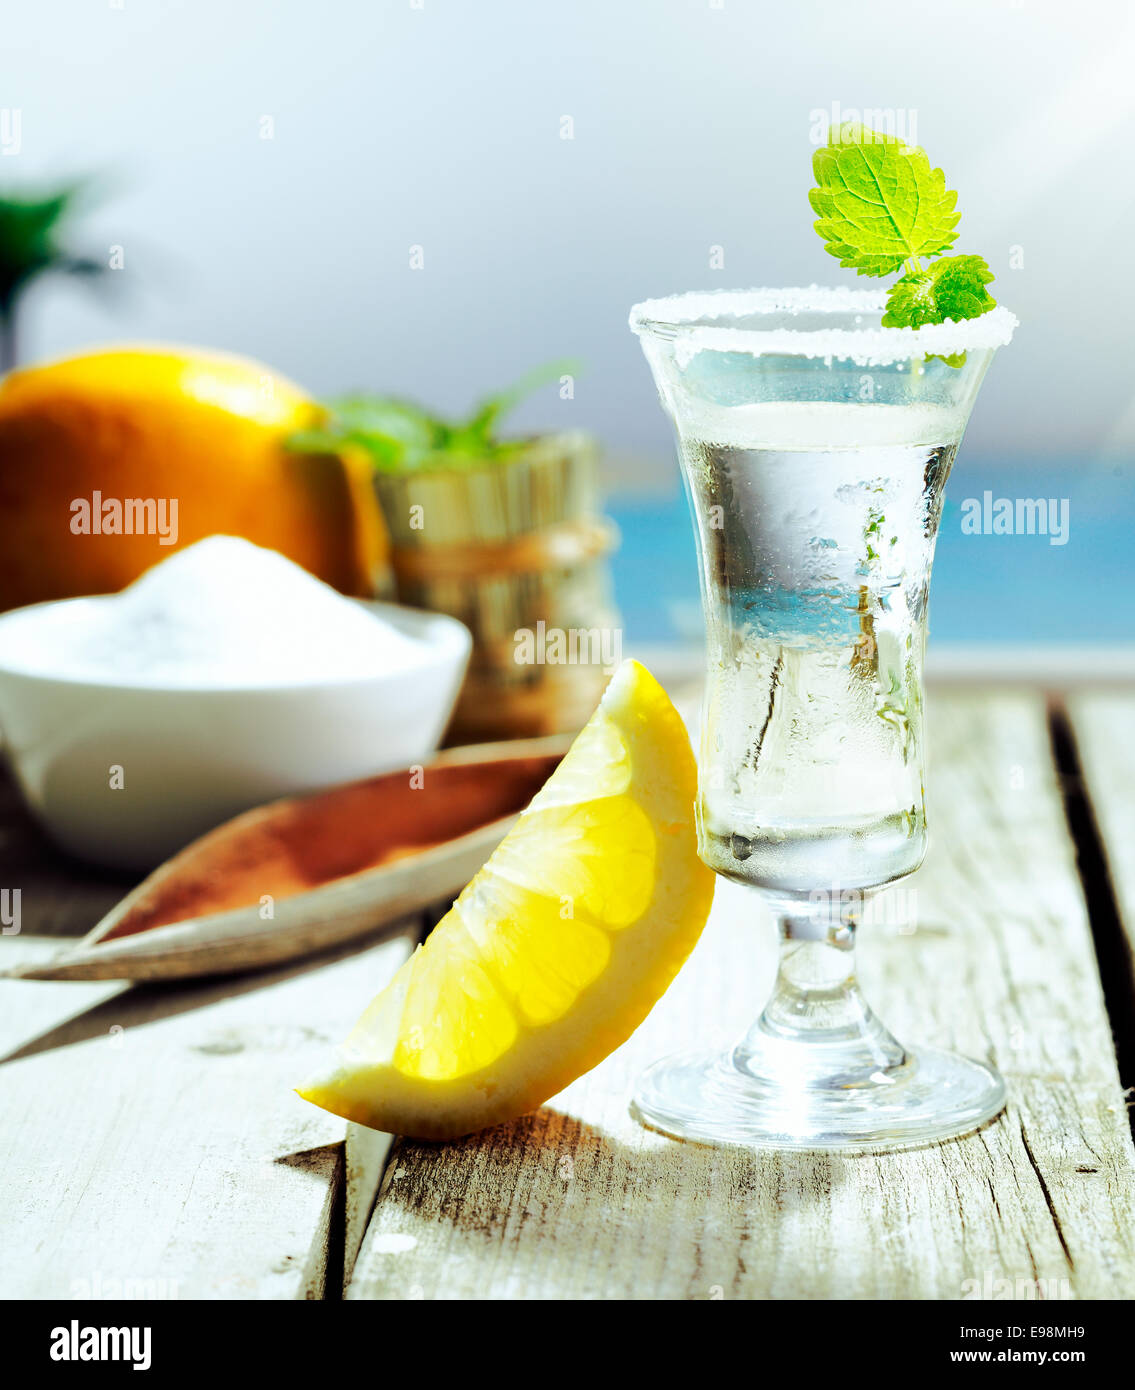 Chilled glass of vodka cocktail garnished with frosting and mint and served with lemon alongside a turquoise pool Stock Photo